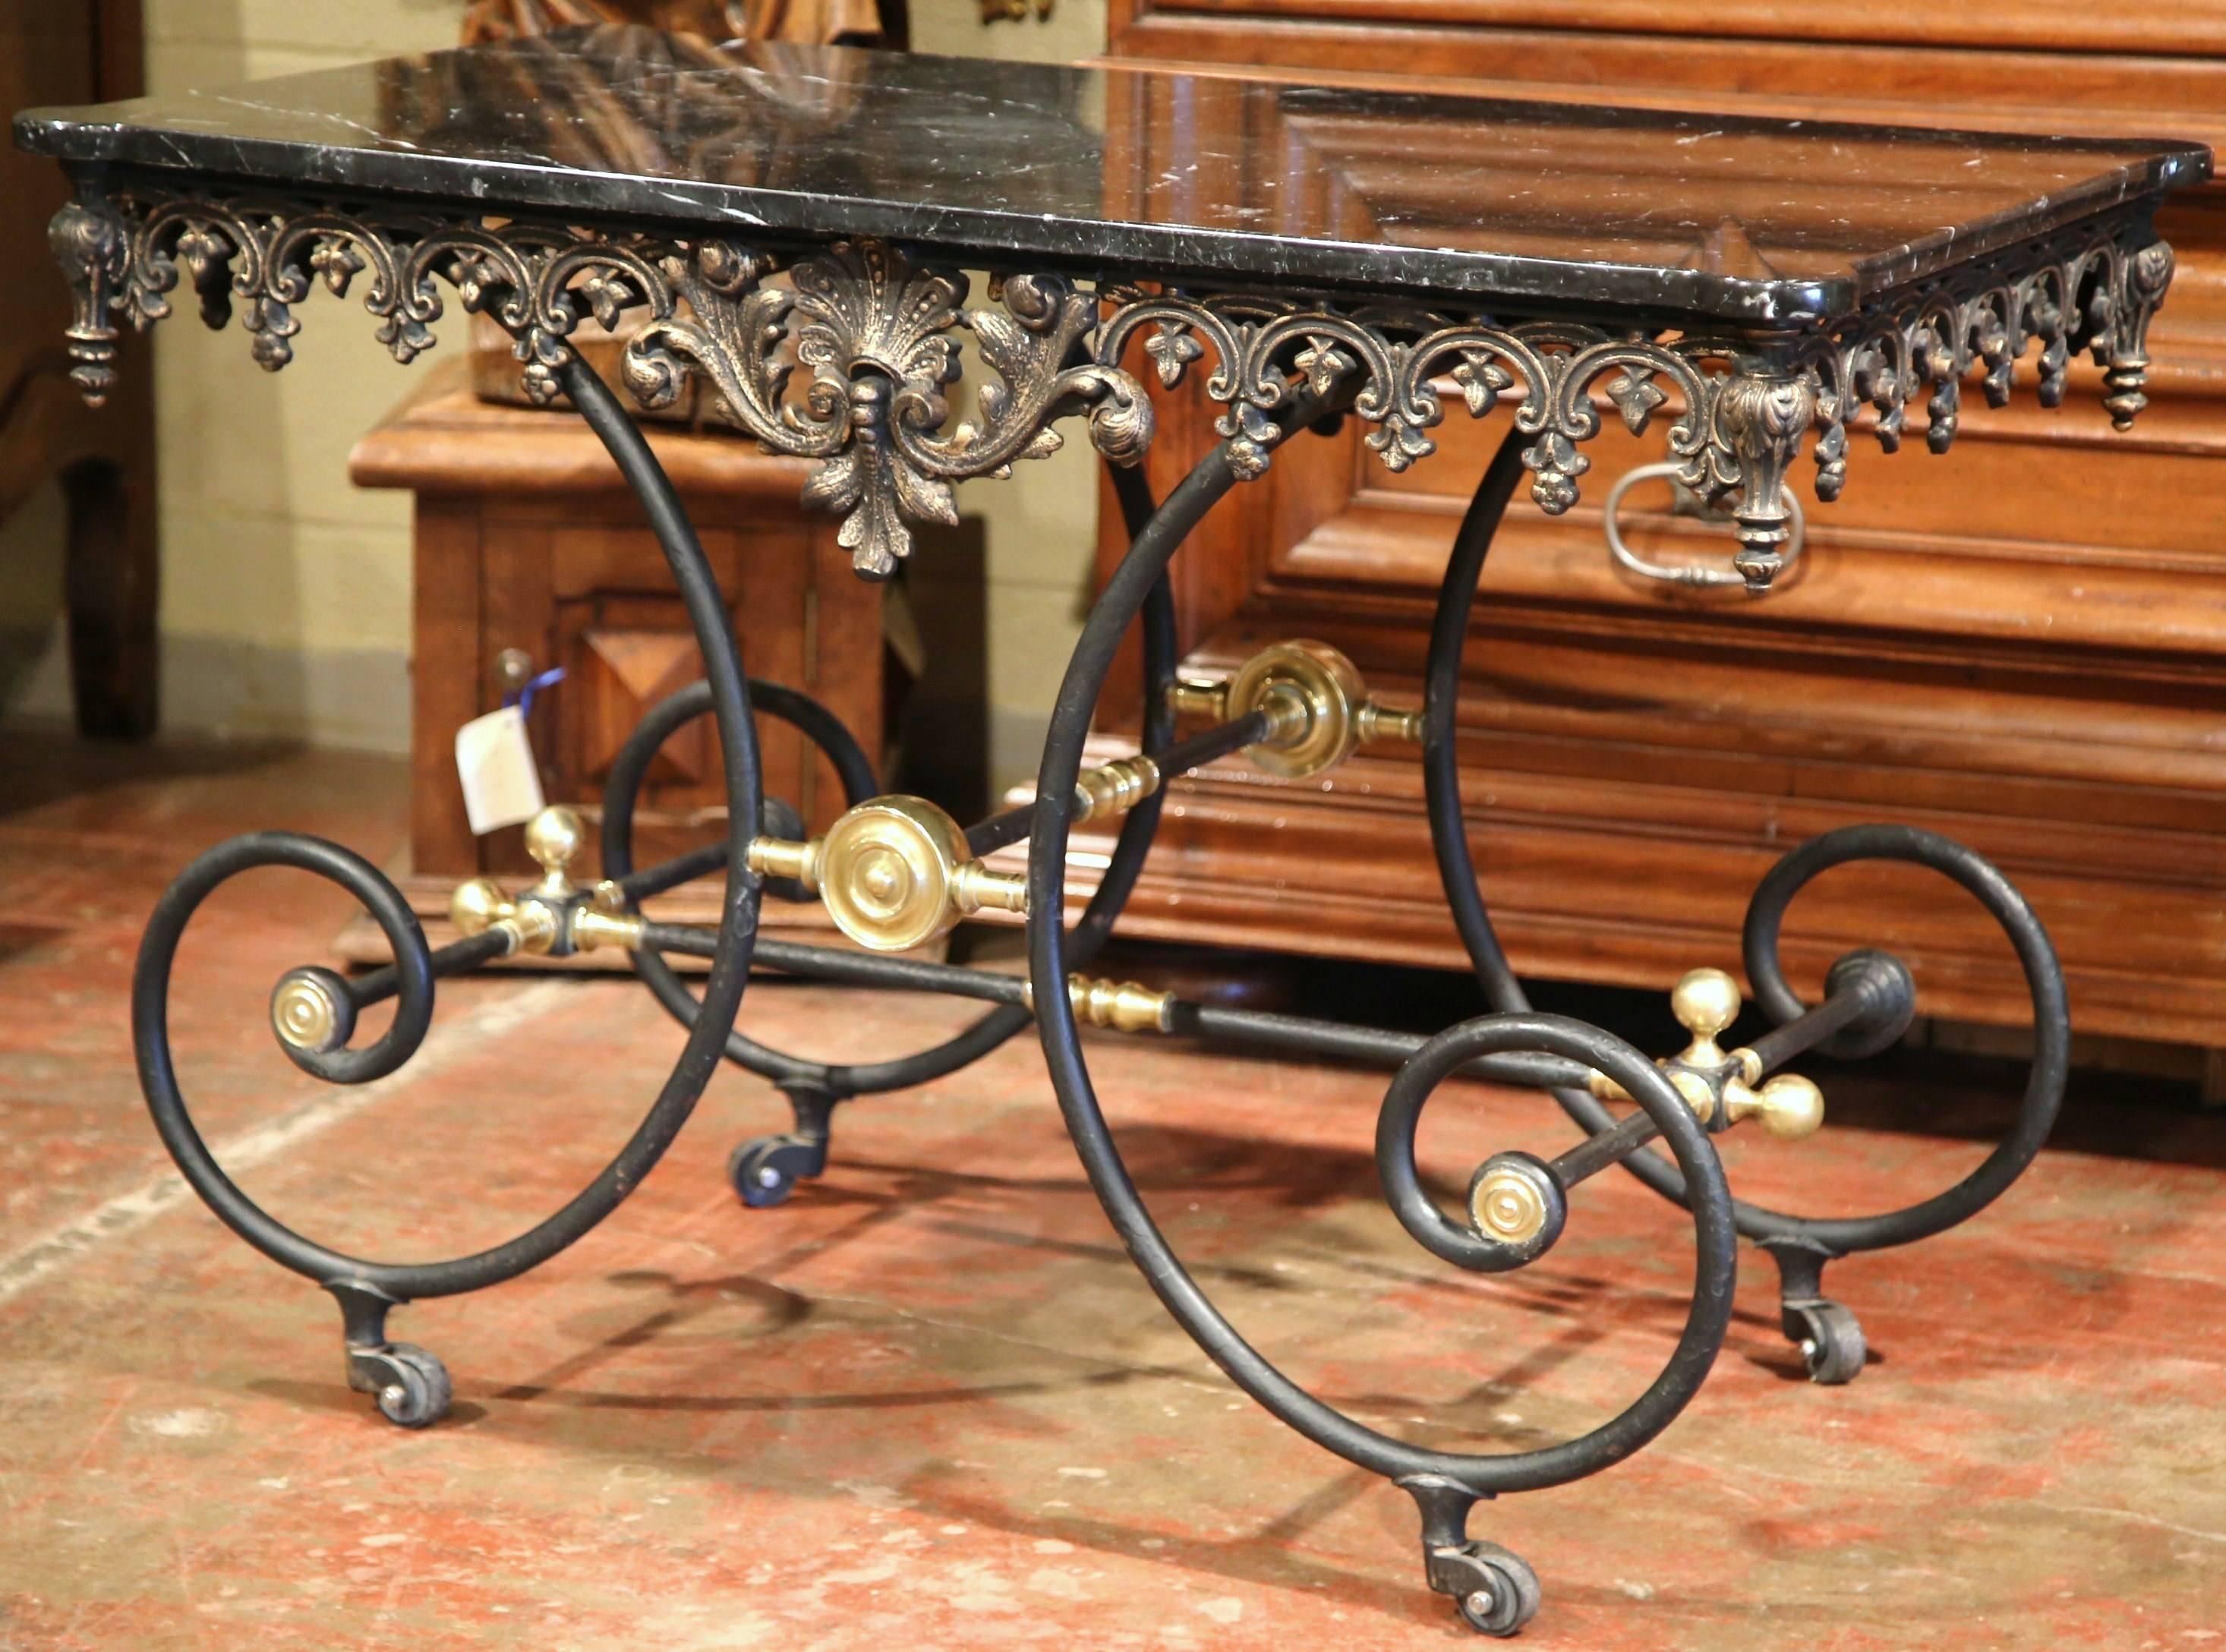 Hand-Carved Mid-20th Century French Iron Butcher Pastry Table on Wheels with Black Marble